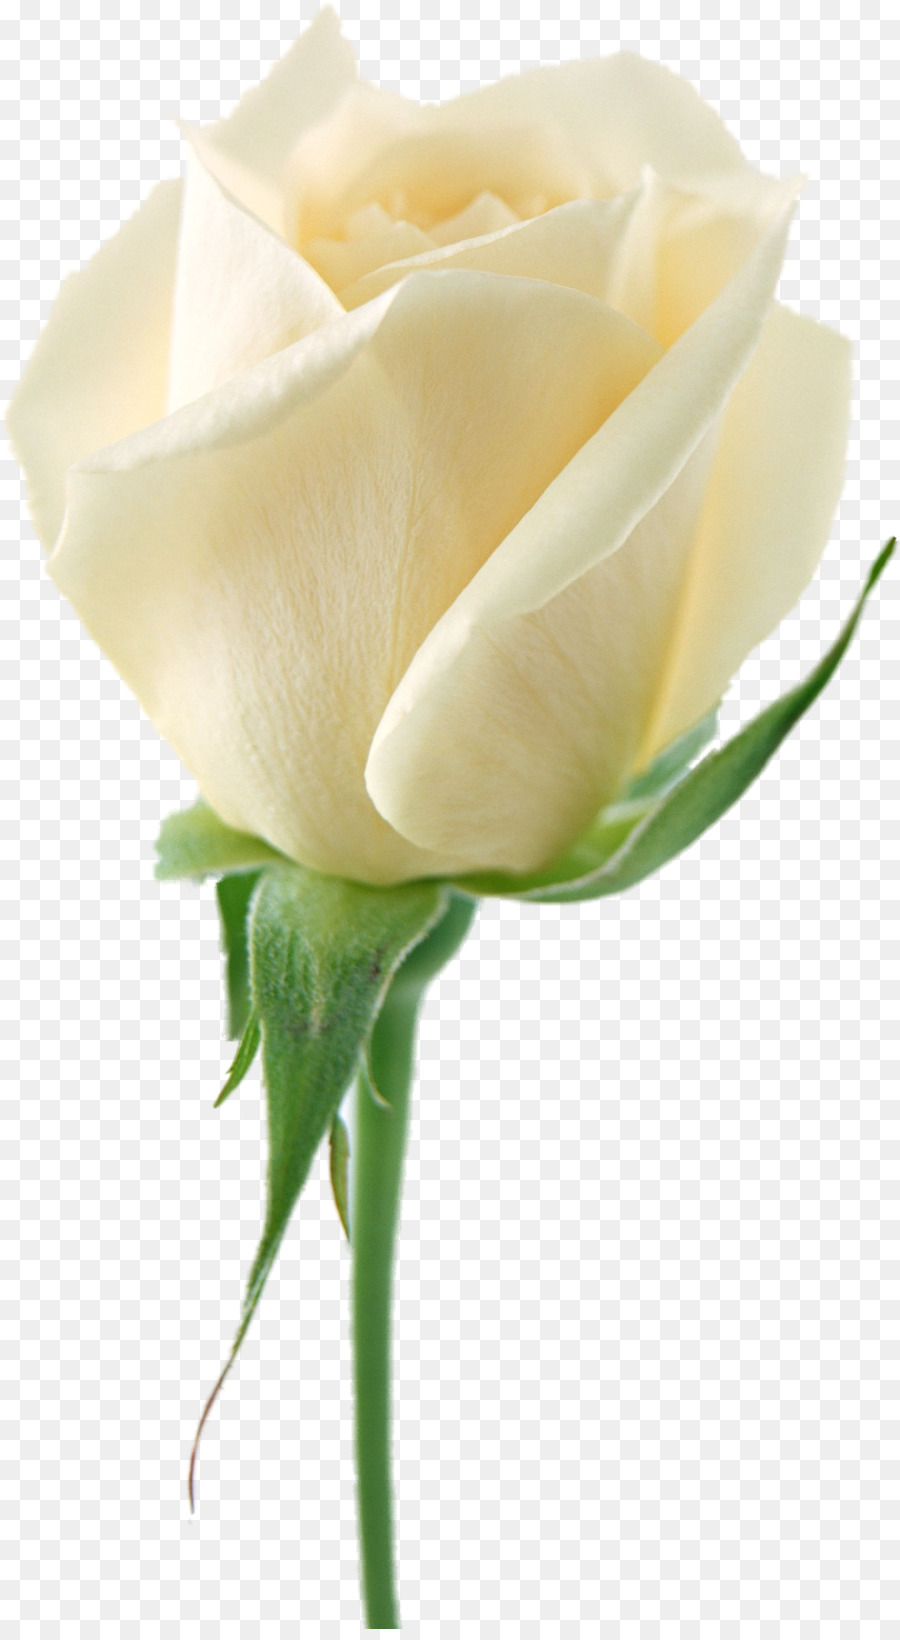 Garden roses Flower bouquet White - white rose png download - 1446*2618 - Free Transparent Rose png Download.